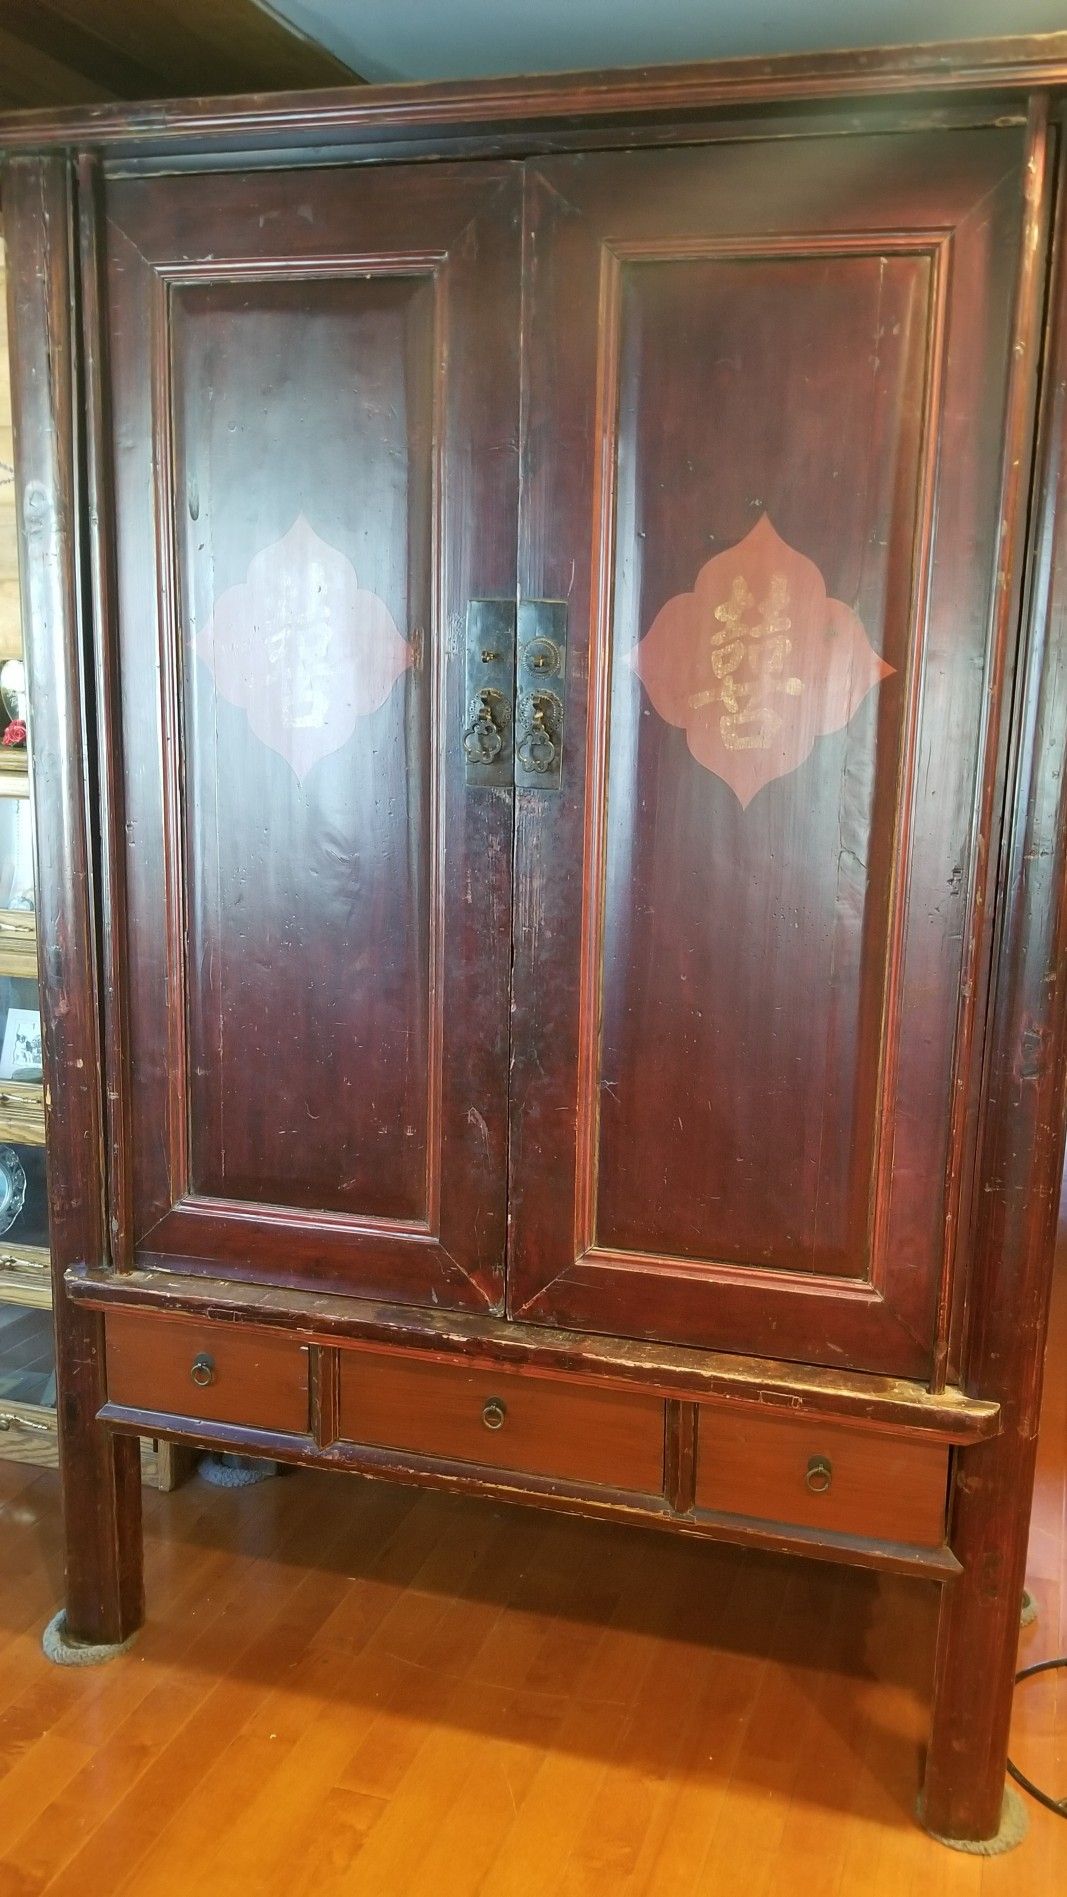 Antique Armoire for wardrobe or Television